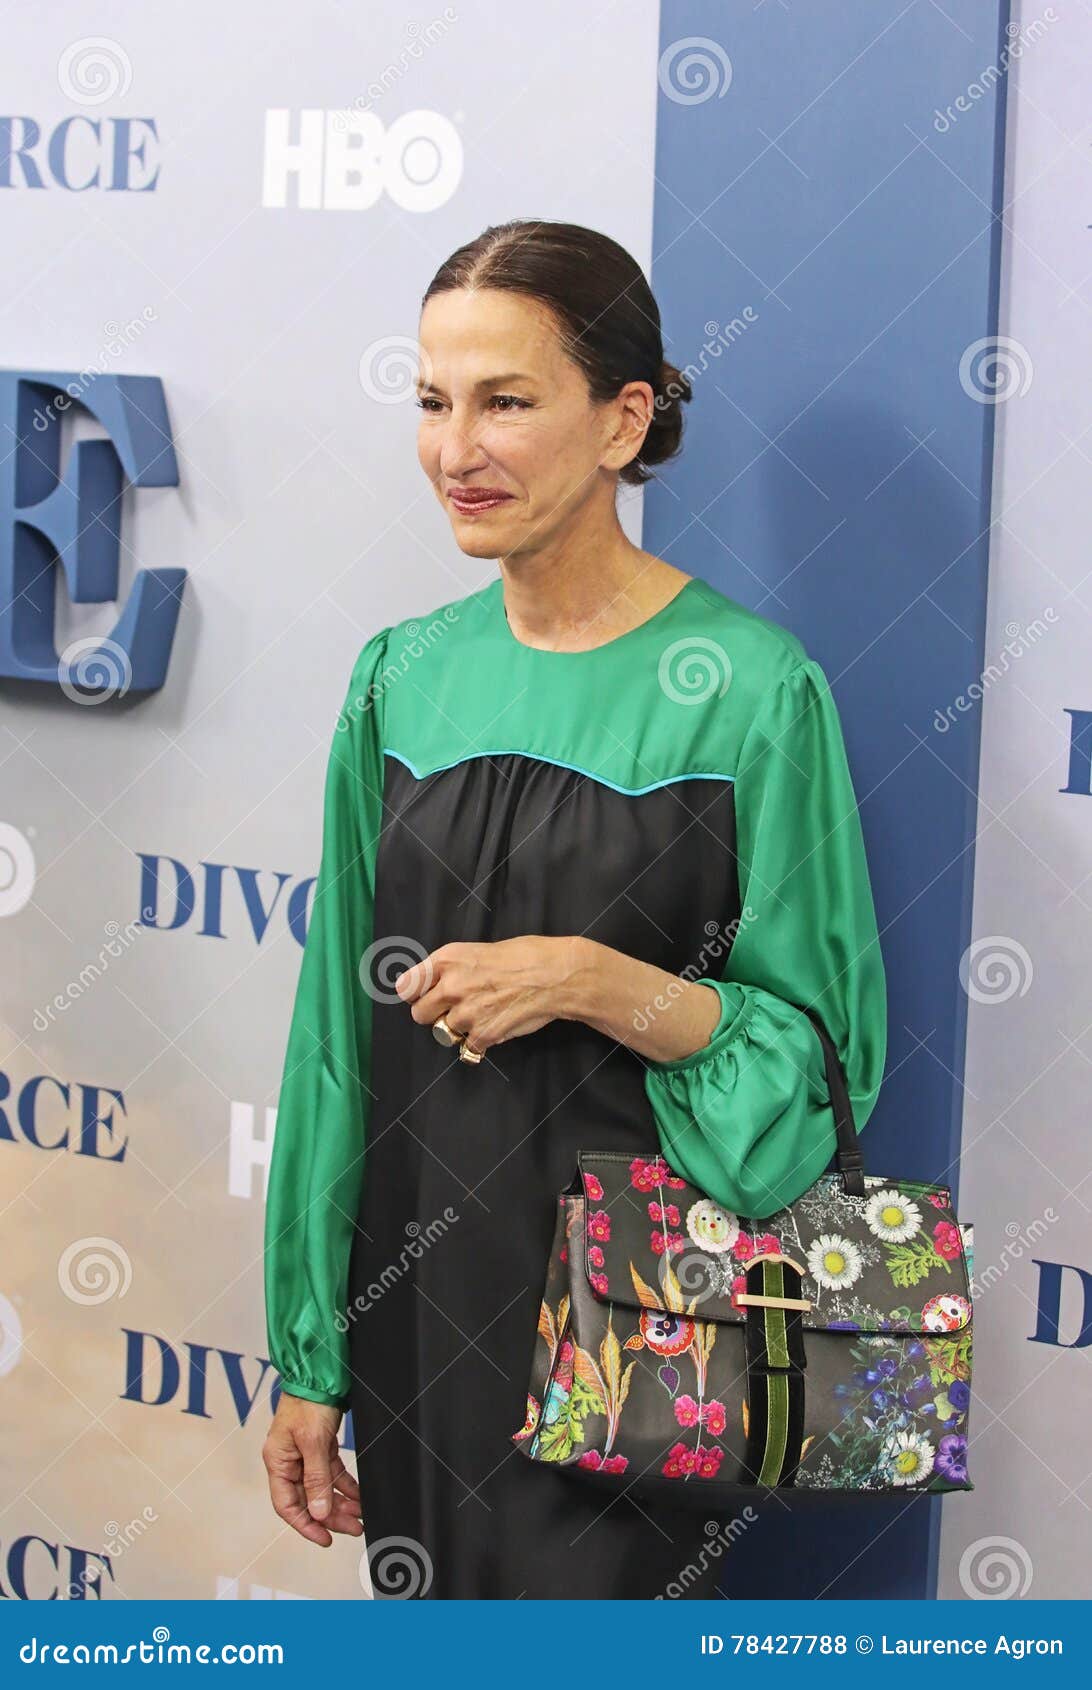 Cynthia Rowley editorial stock photo. Image of business - 78427788